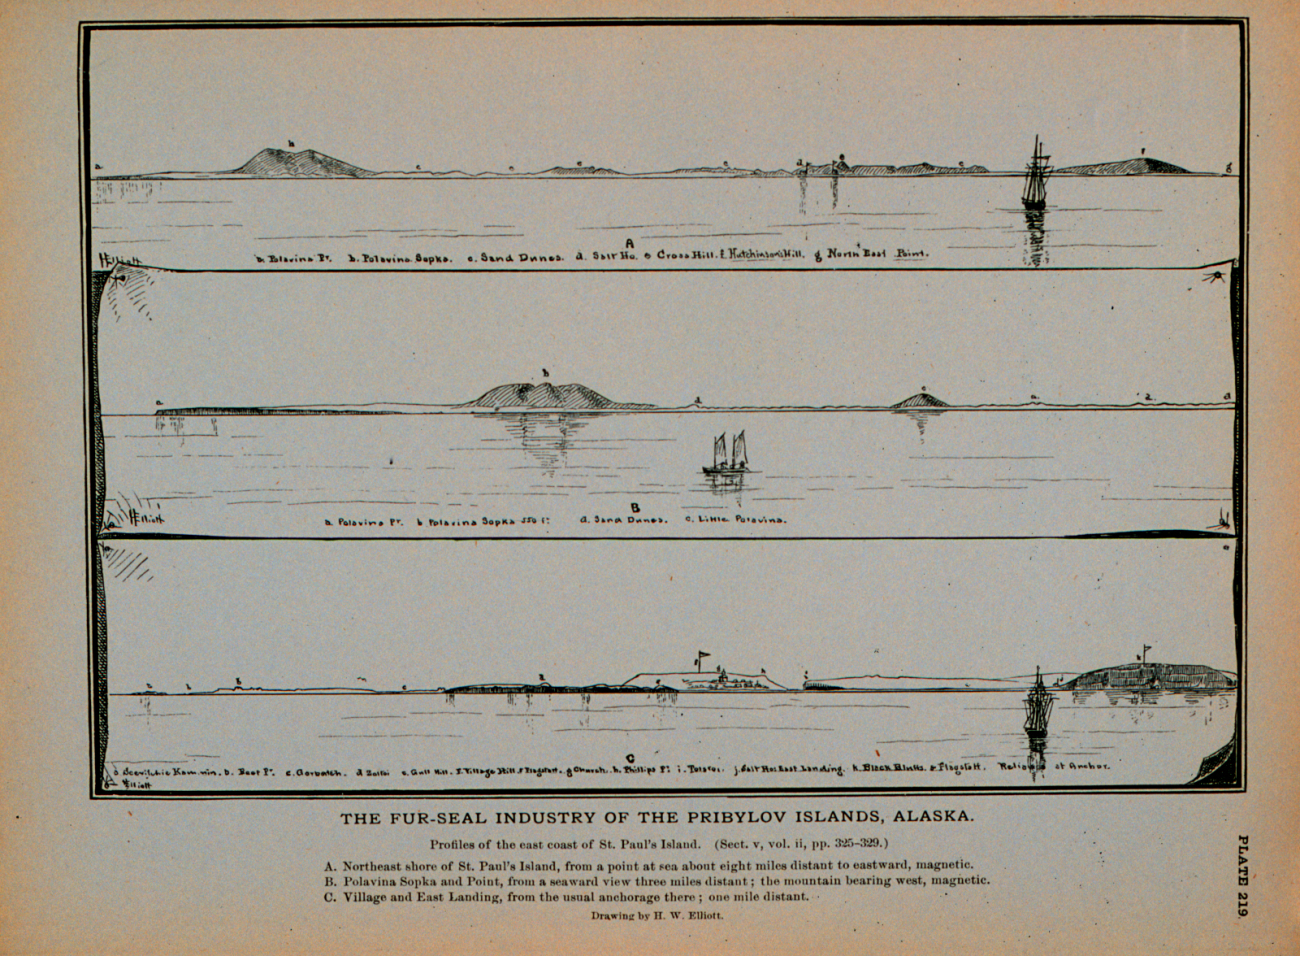 Profiles of the east coast of Saint Paul's IslandDrawing by H